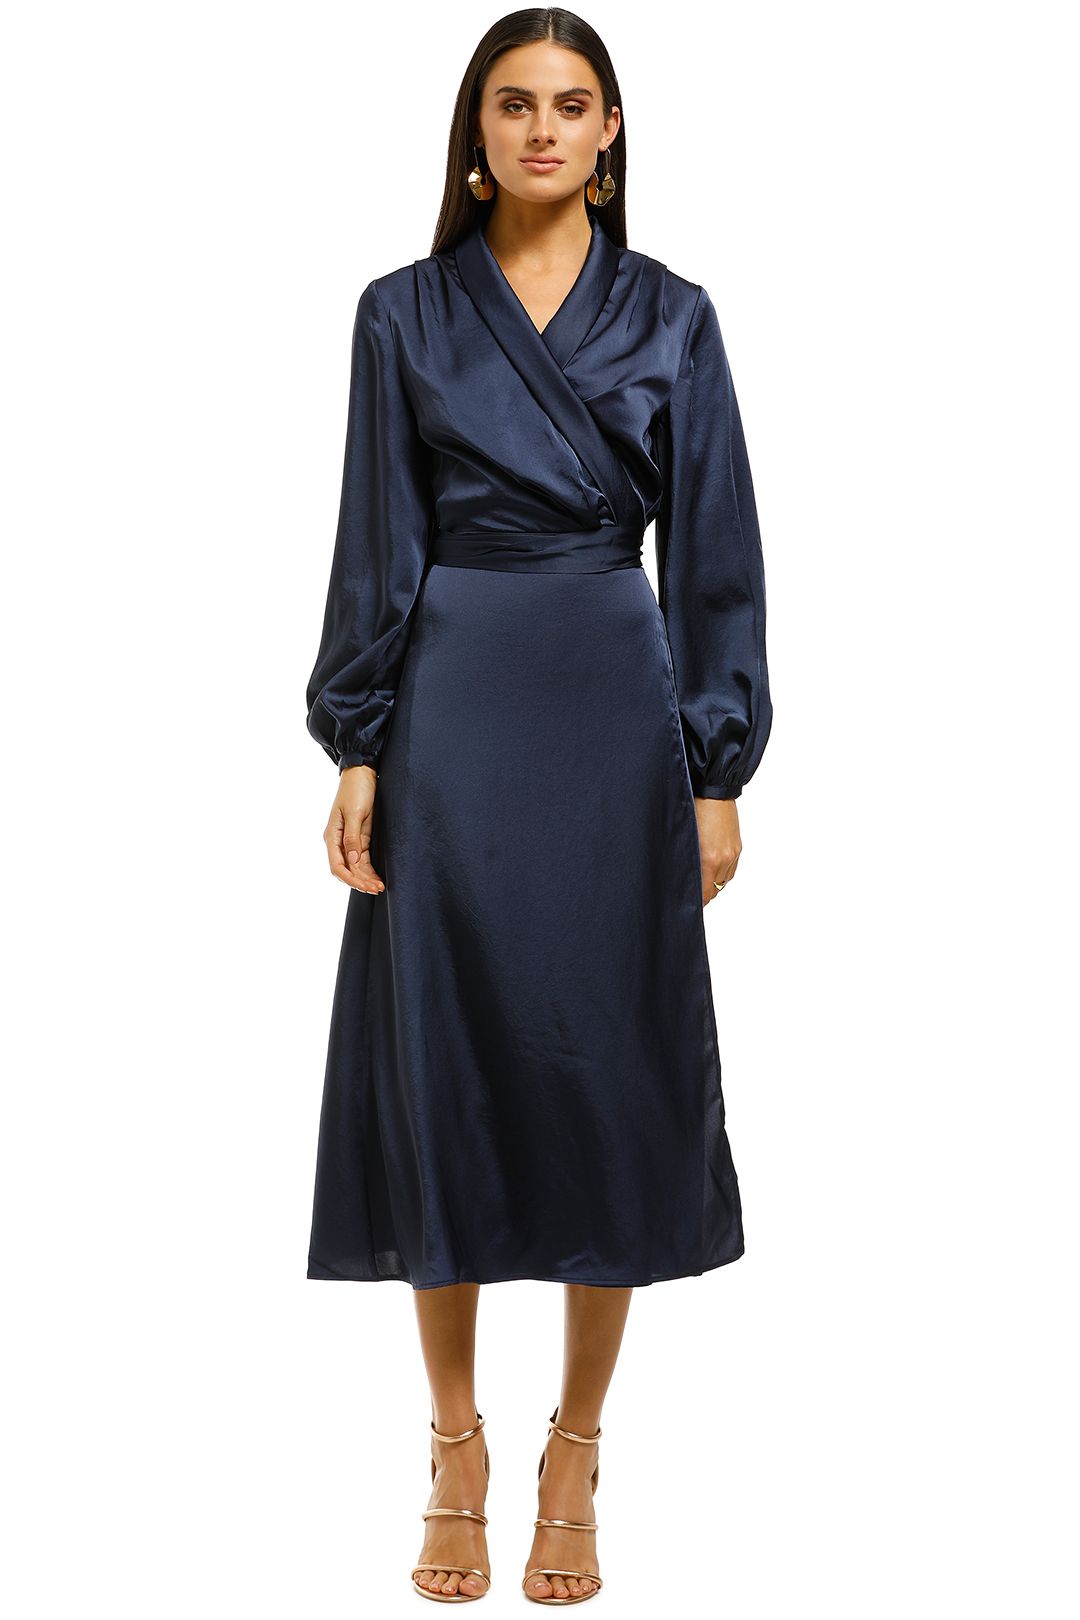 CMEO-Collective-Late-Thought-Midi-Dress-Navy-Front